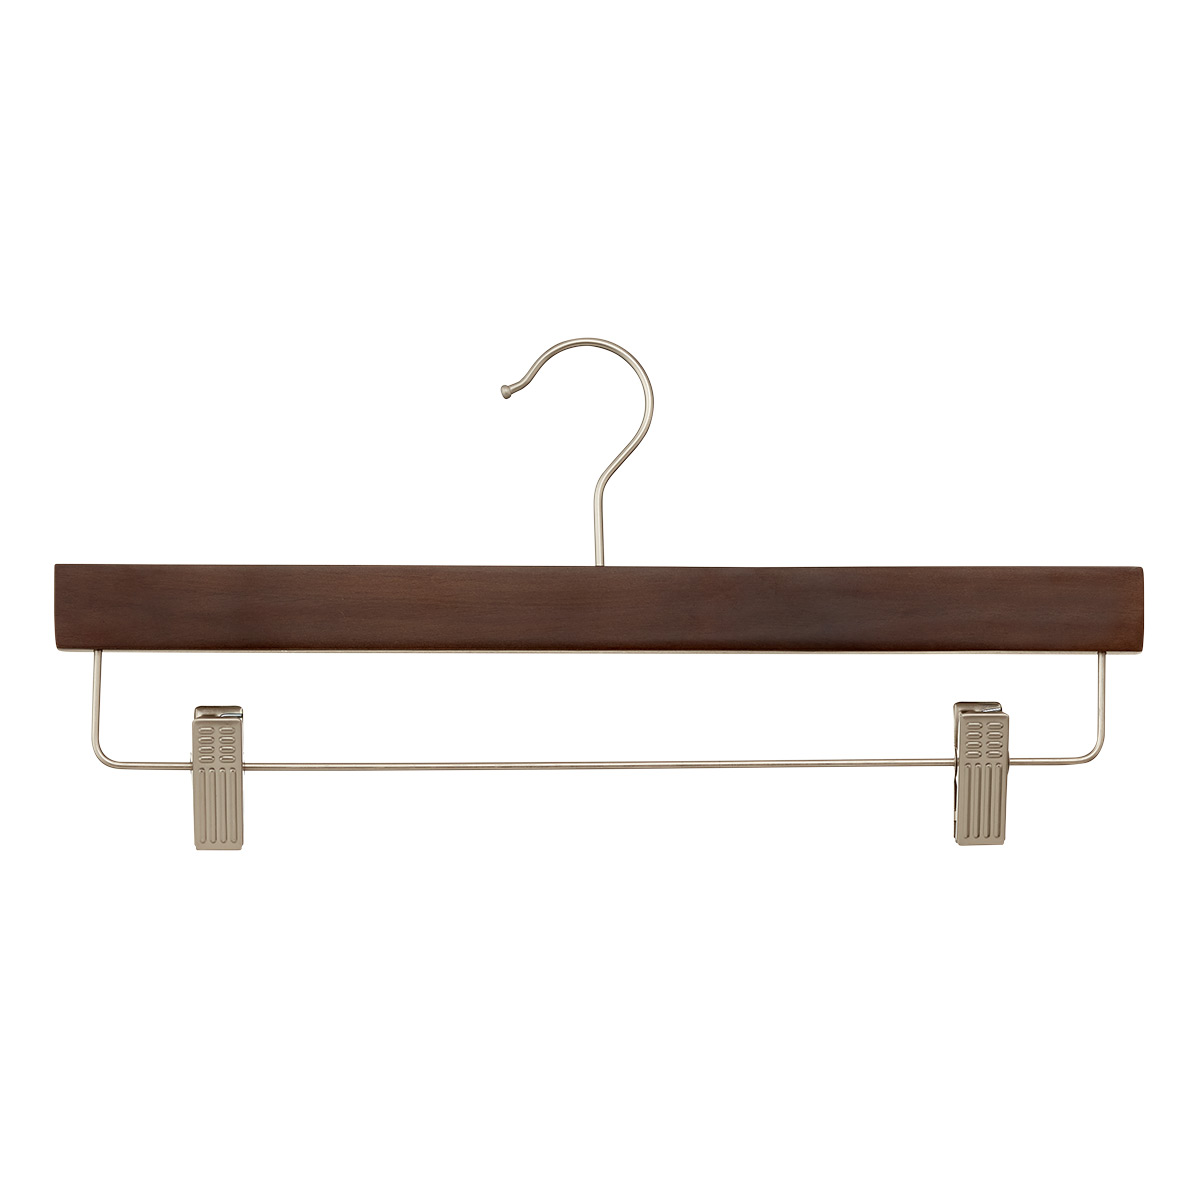 https://www.containerstore.com/catalogimages/477889/10091293-wooden-pant-skirt-hanger-st.jpg